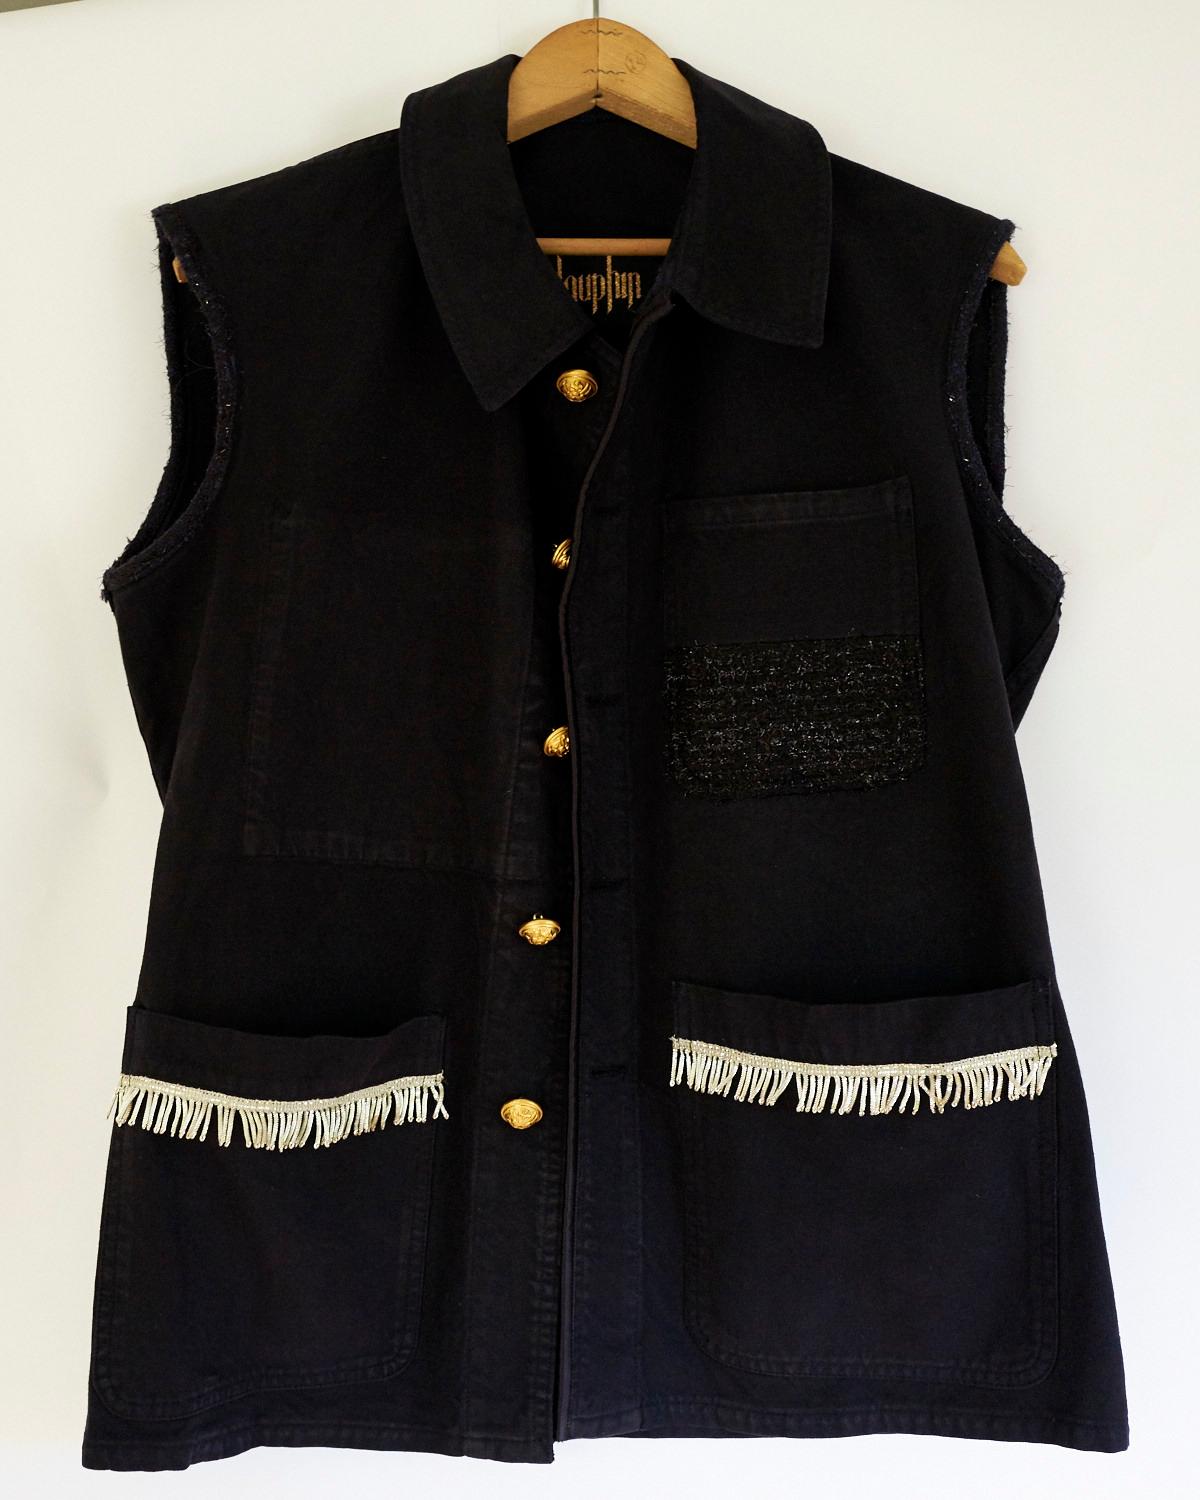 Embellished French Work Jacket Repurposed into Sleeveless Jacket Vest With Antique French Silver Bullion Fringe Silver Braid Black Silk Collar and Black Shiny Pocket, Gold Buttons, One of a kind
Brand: J Dauphin
Size: Small Medium
Sustainable